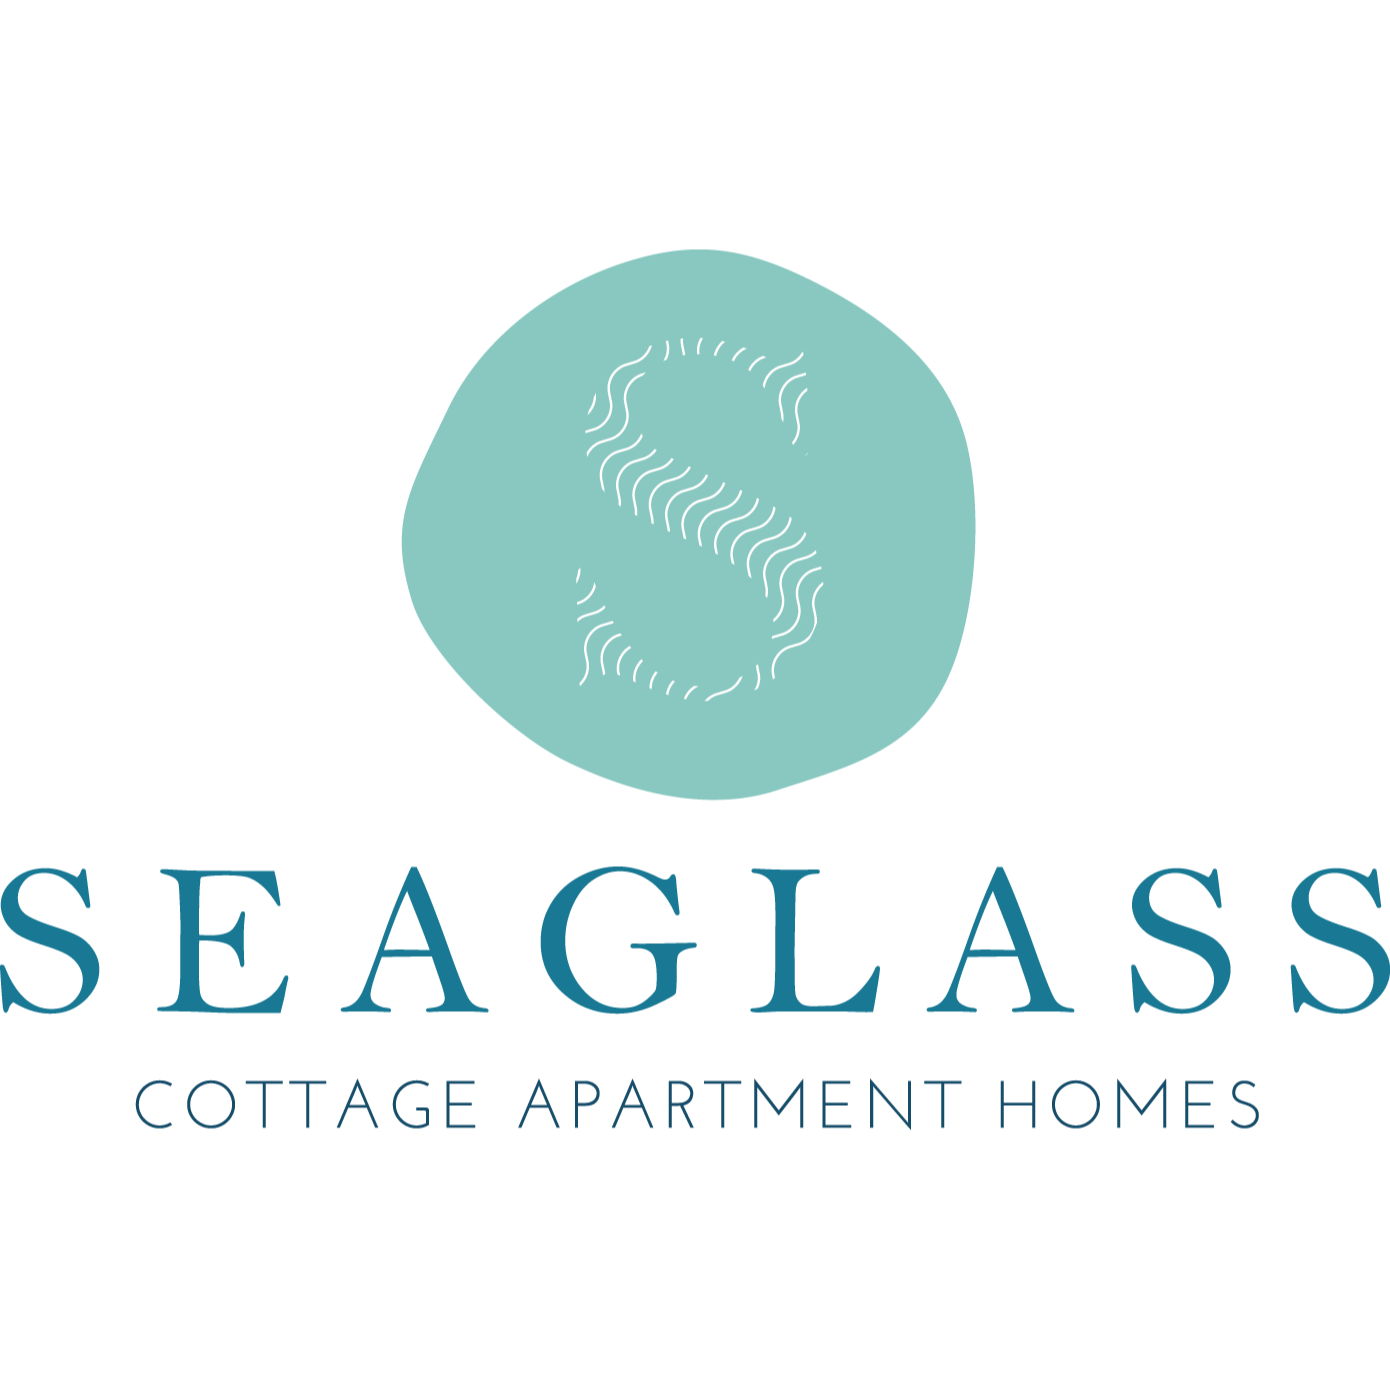 Seaglass Cottage Apartment Homes